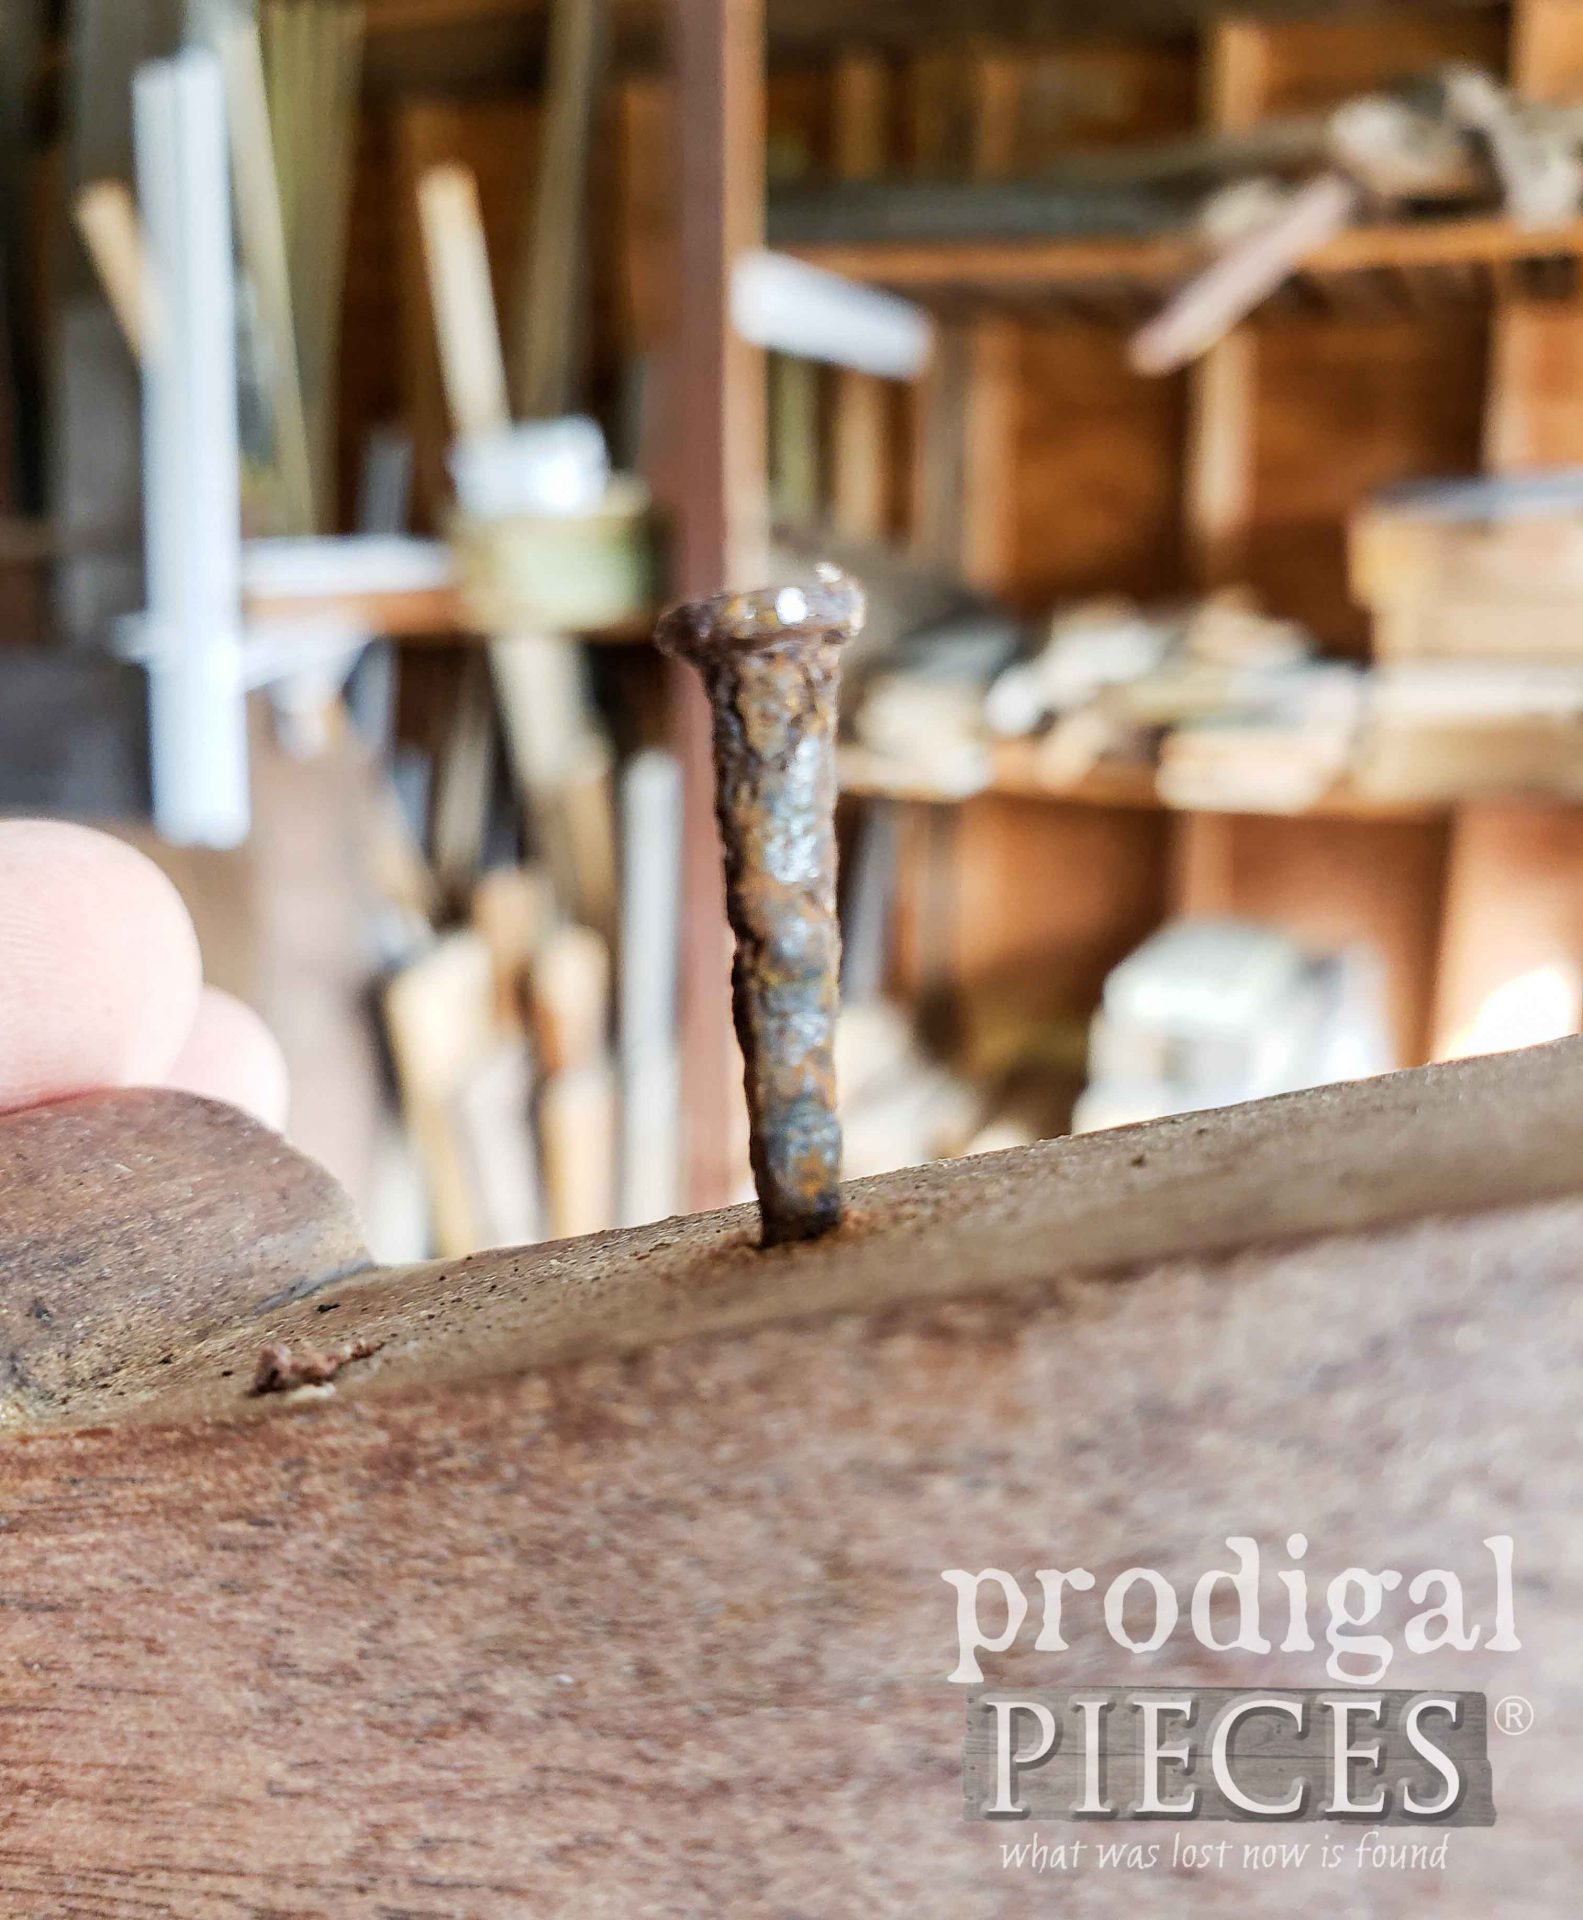 Hand-Forged Nail from Antique Bed Salvaged into Home Decor by Larissa of Prodigal Pieces | prodigalpieces.com #prodigalpieces #farmhouse #home #homedecor #upcycled #handmade